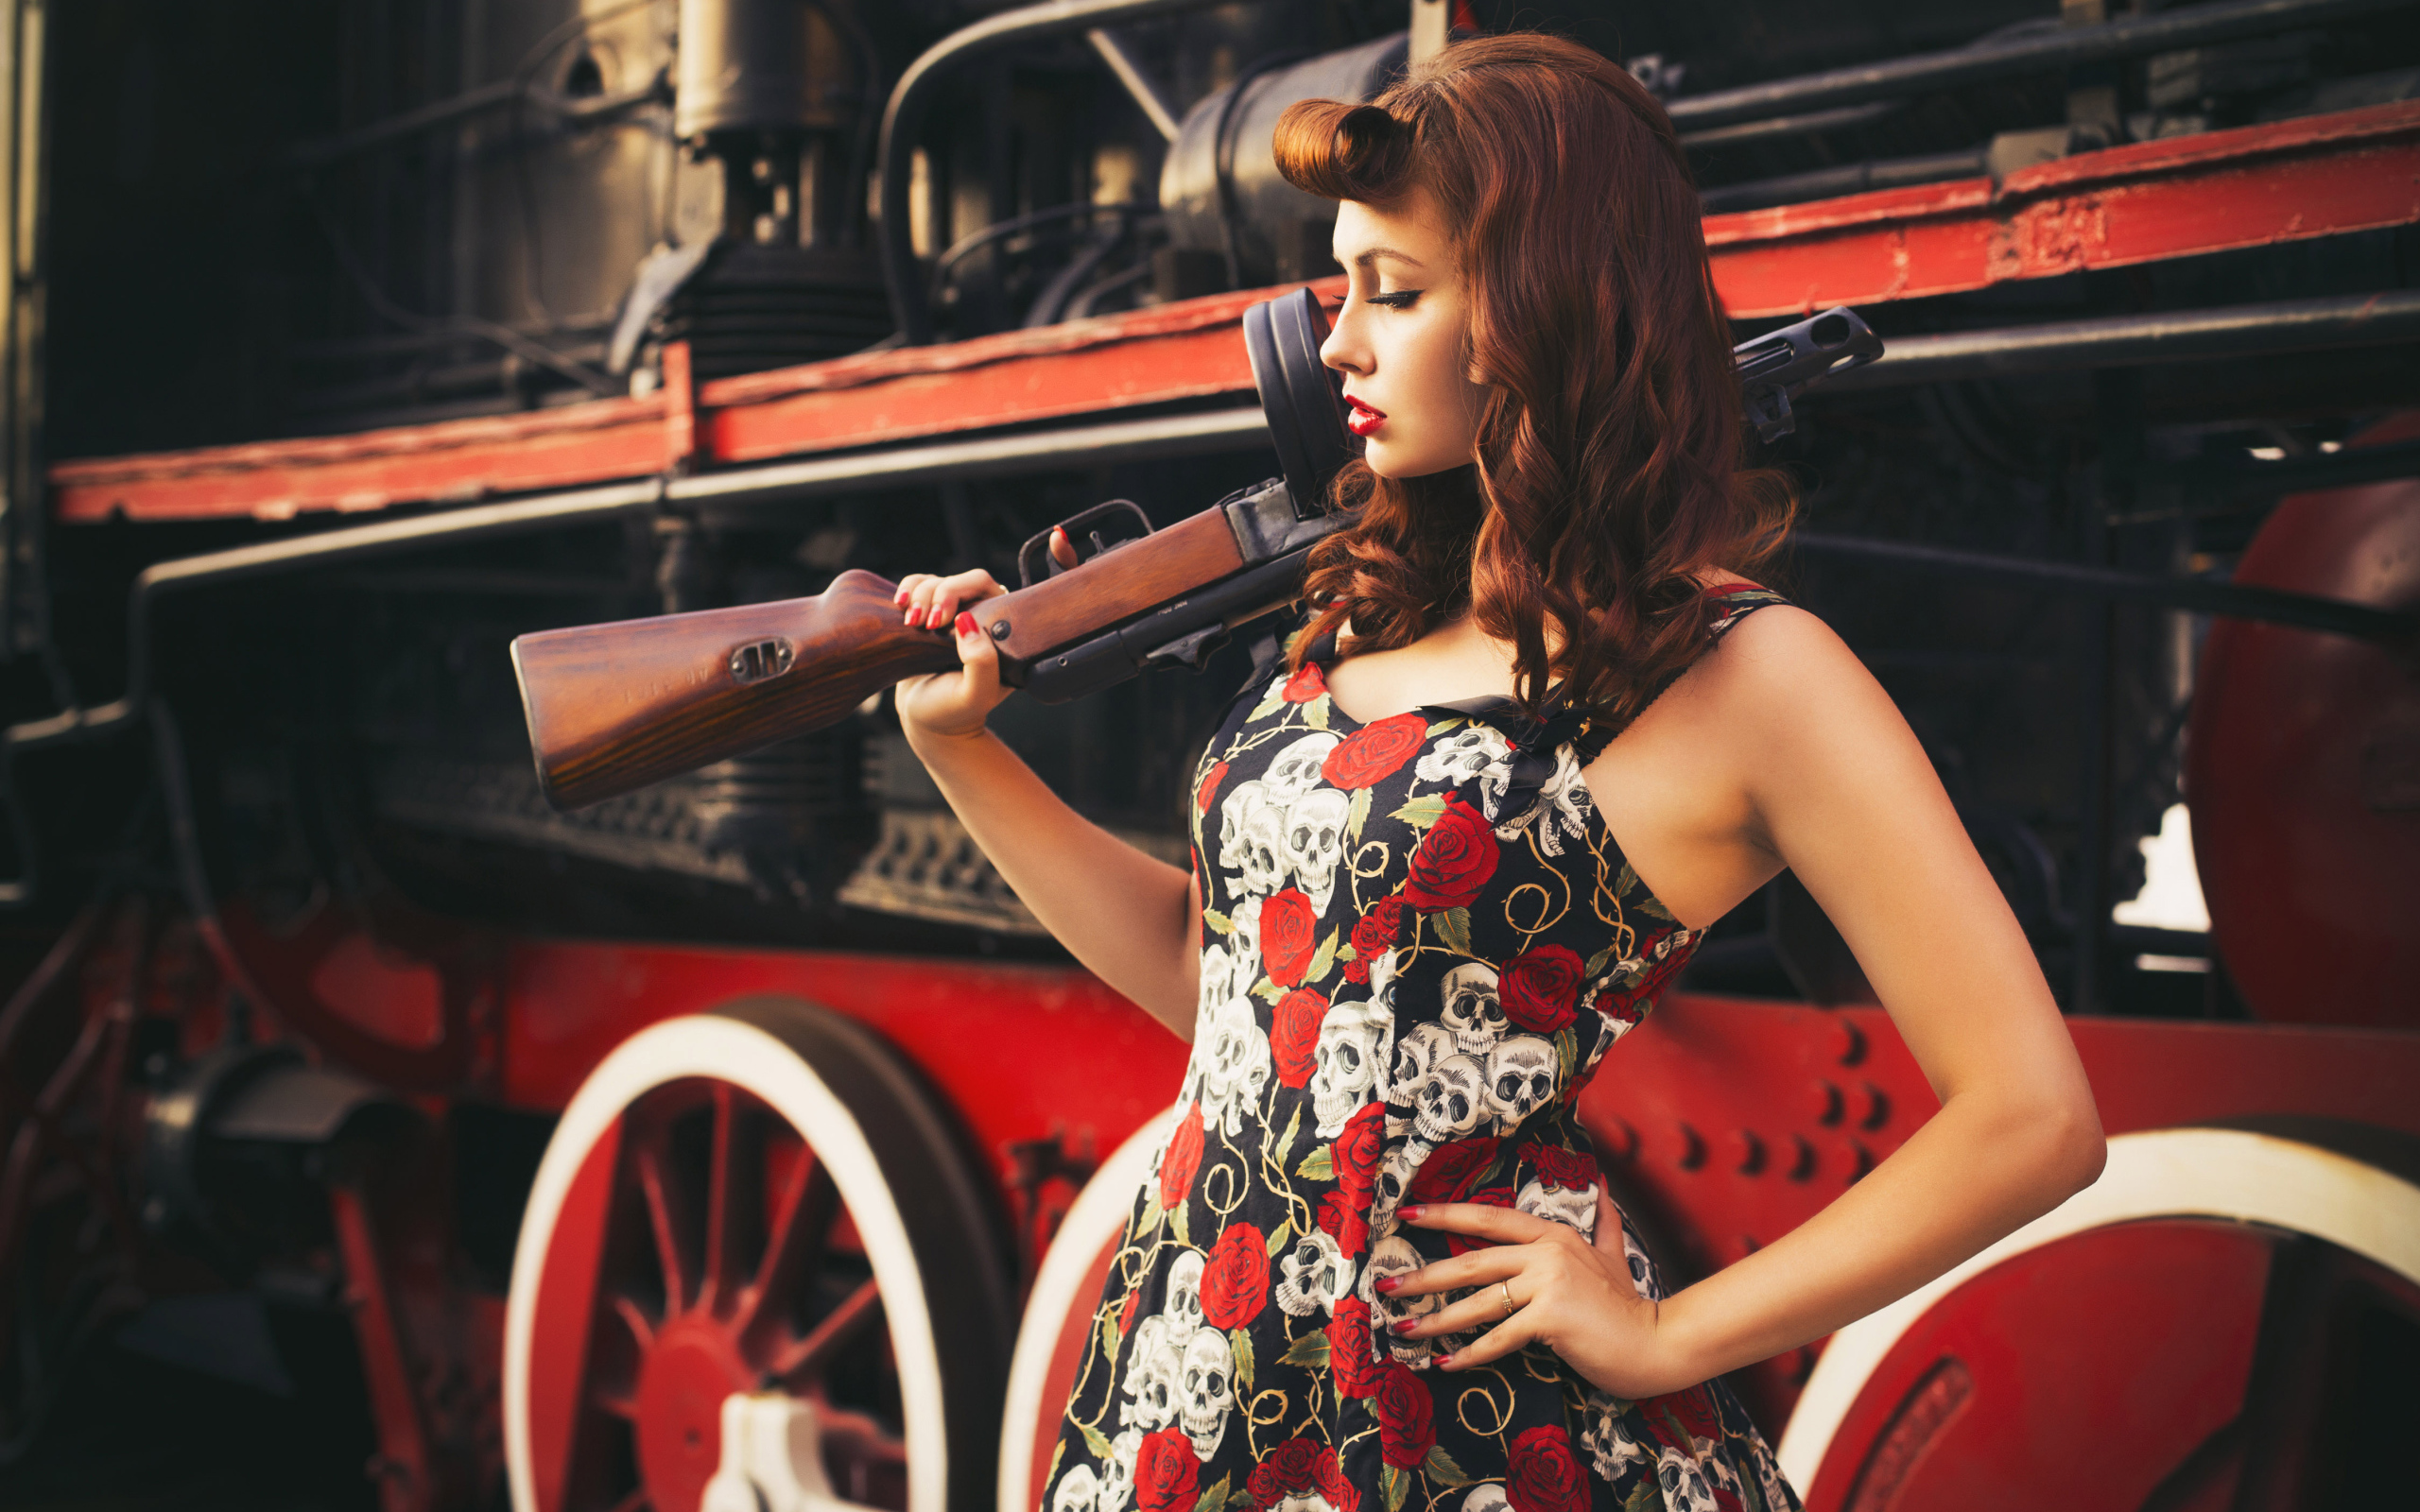 Retro girl with a gun in the hand of a diesel locomotive  